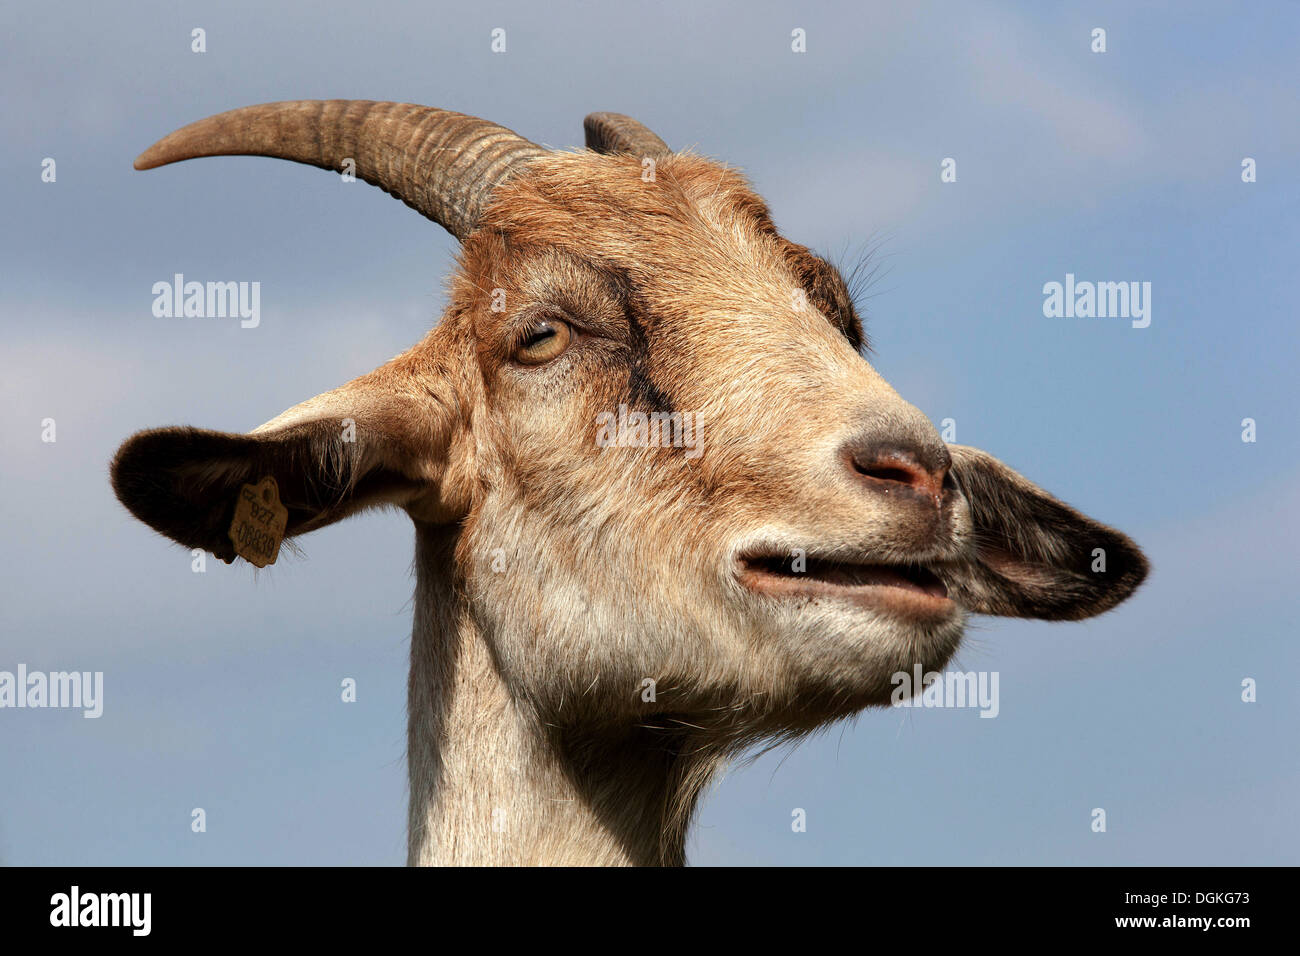 Goat head mouth, horns Stock Photo